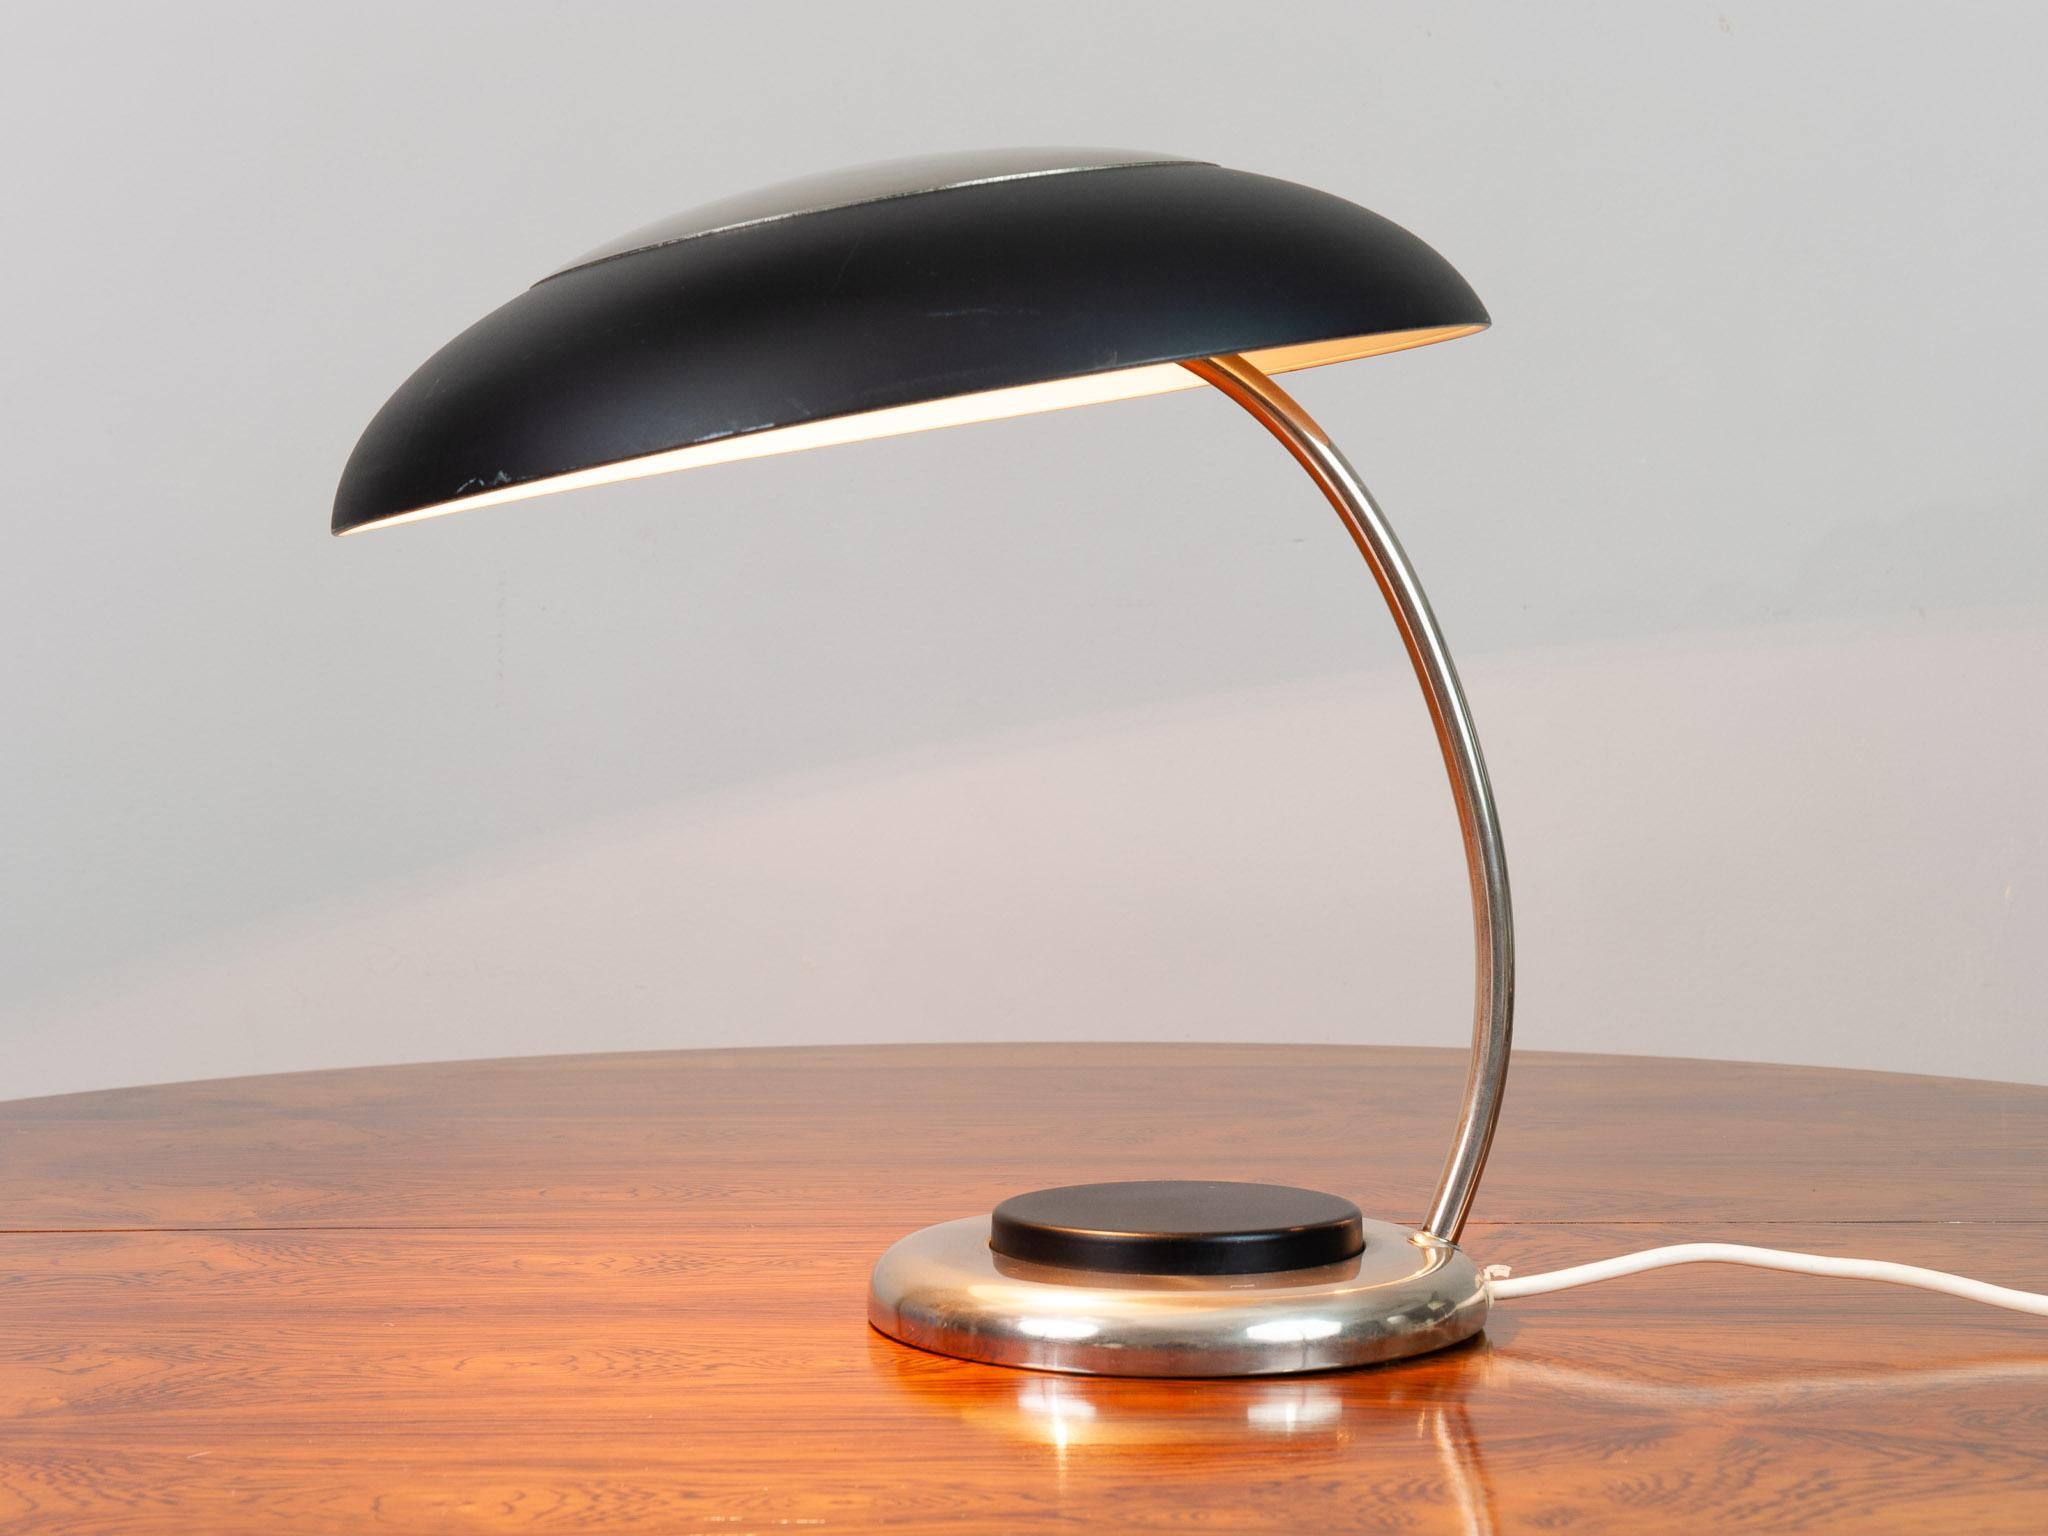 1970s German black and chrome desk lamp. A large single black on and off button sits within the chrome base. A single screw in E27 bulb sits underneath the circular canopy. The chrome curved stem connects the shade to the base. The desk lamp is in